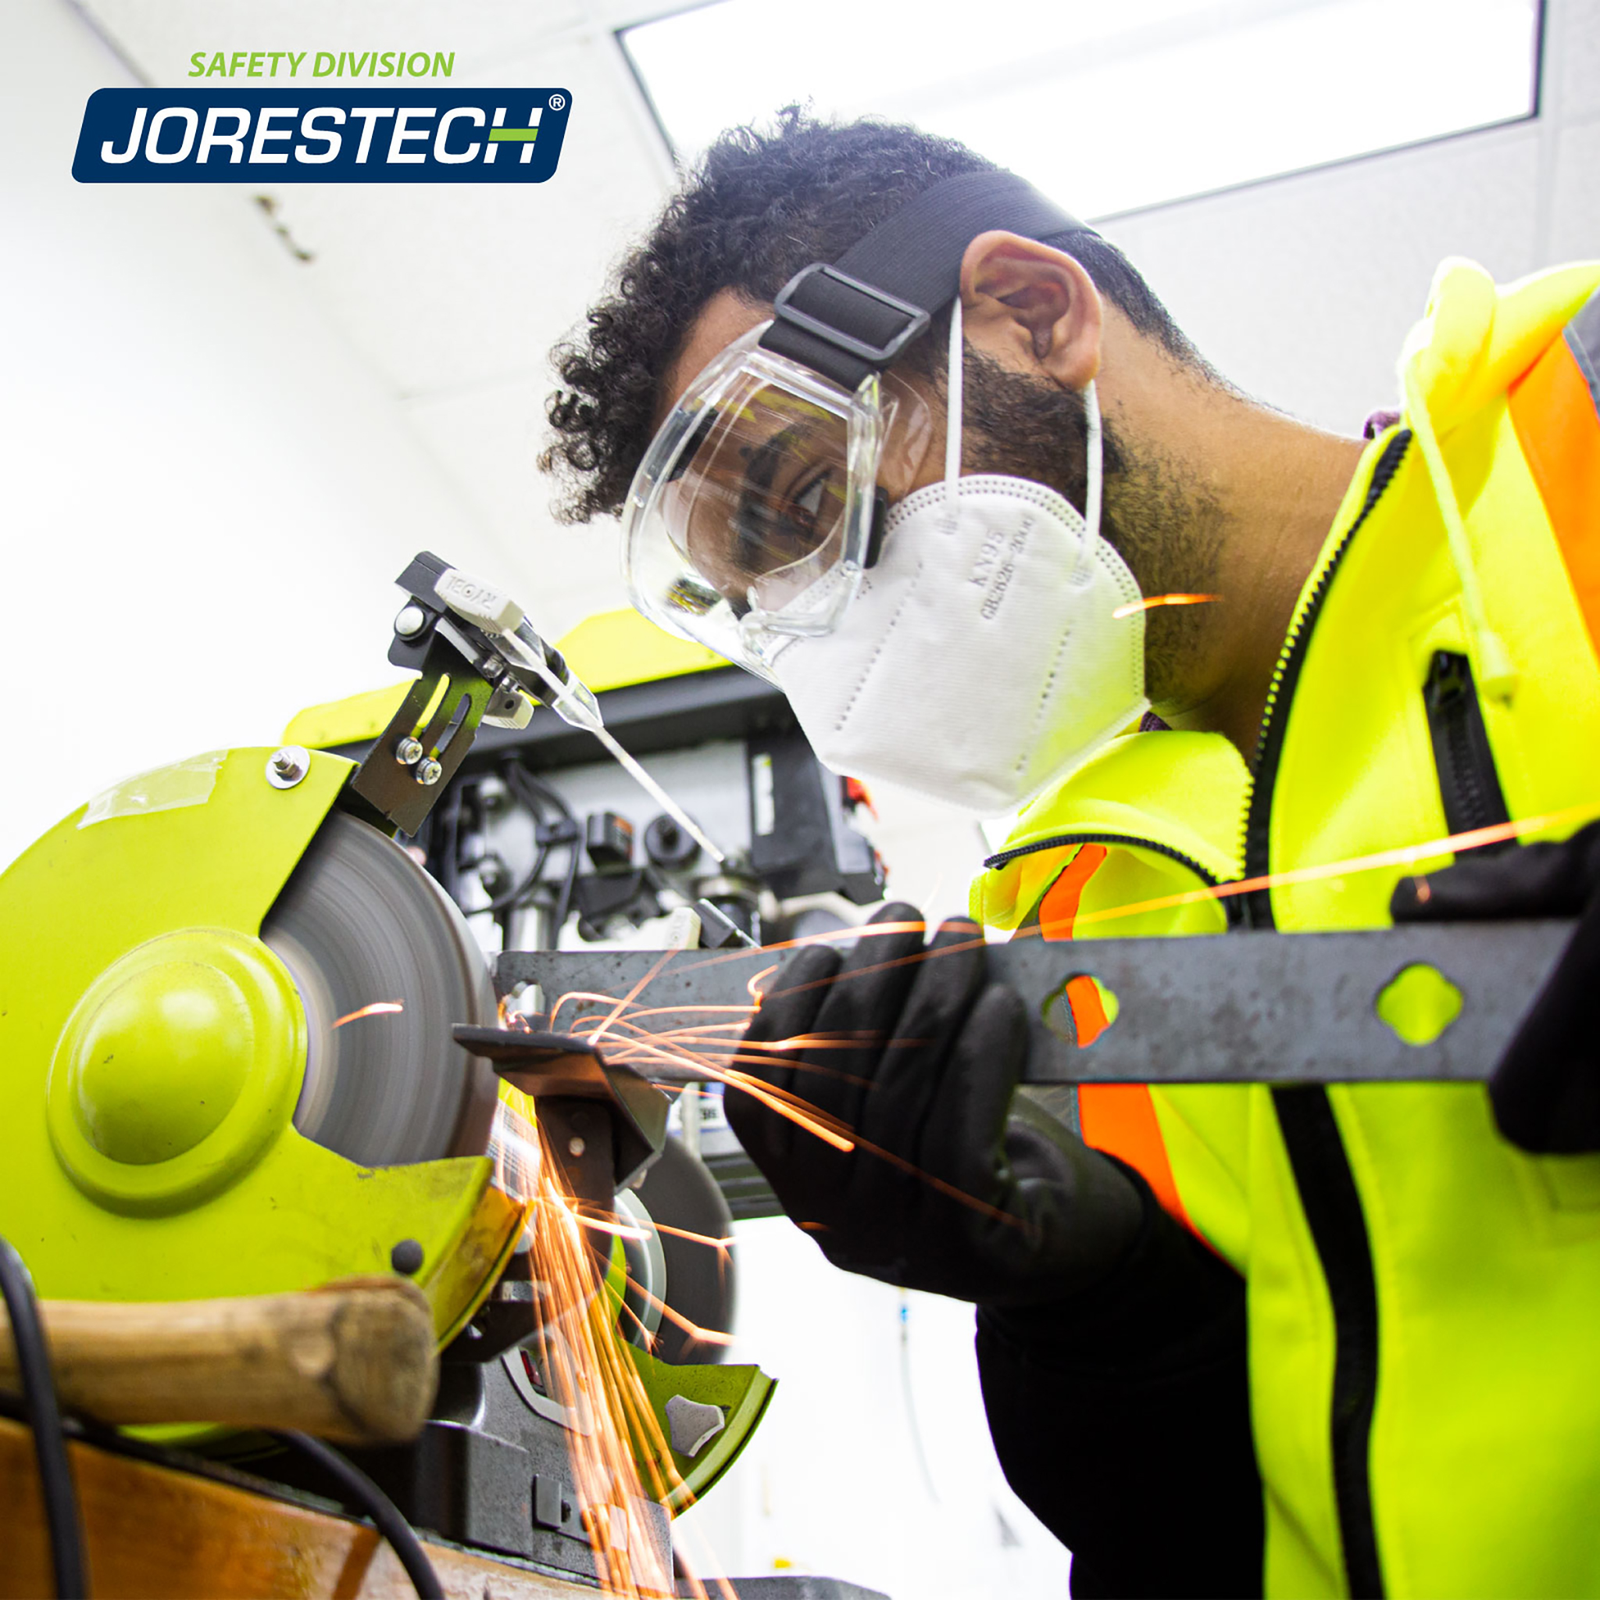 A mechanic wearing JORESTECH safety goggle while operating a power tool machine